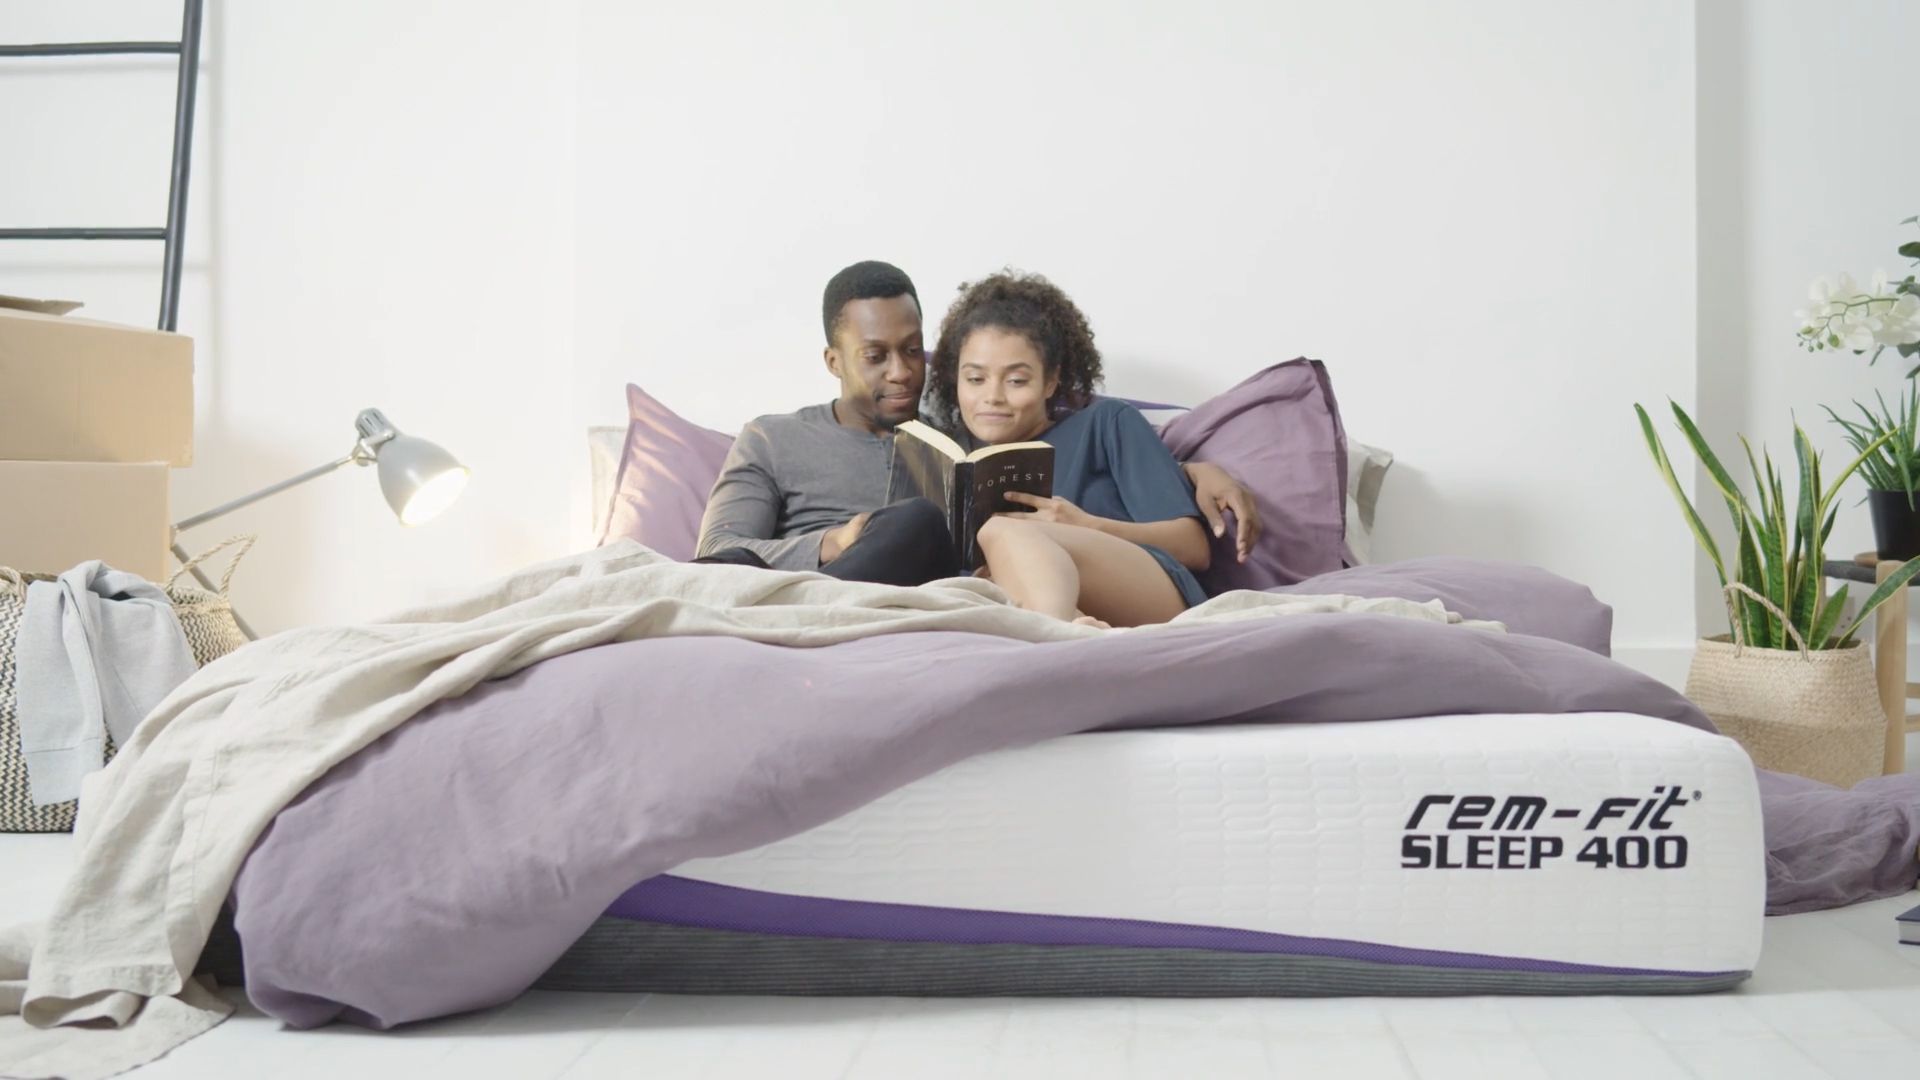 Couple reading together on mattress